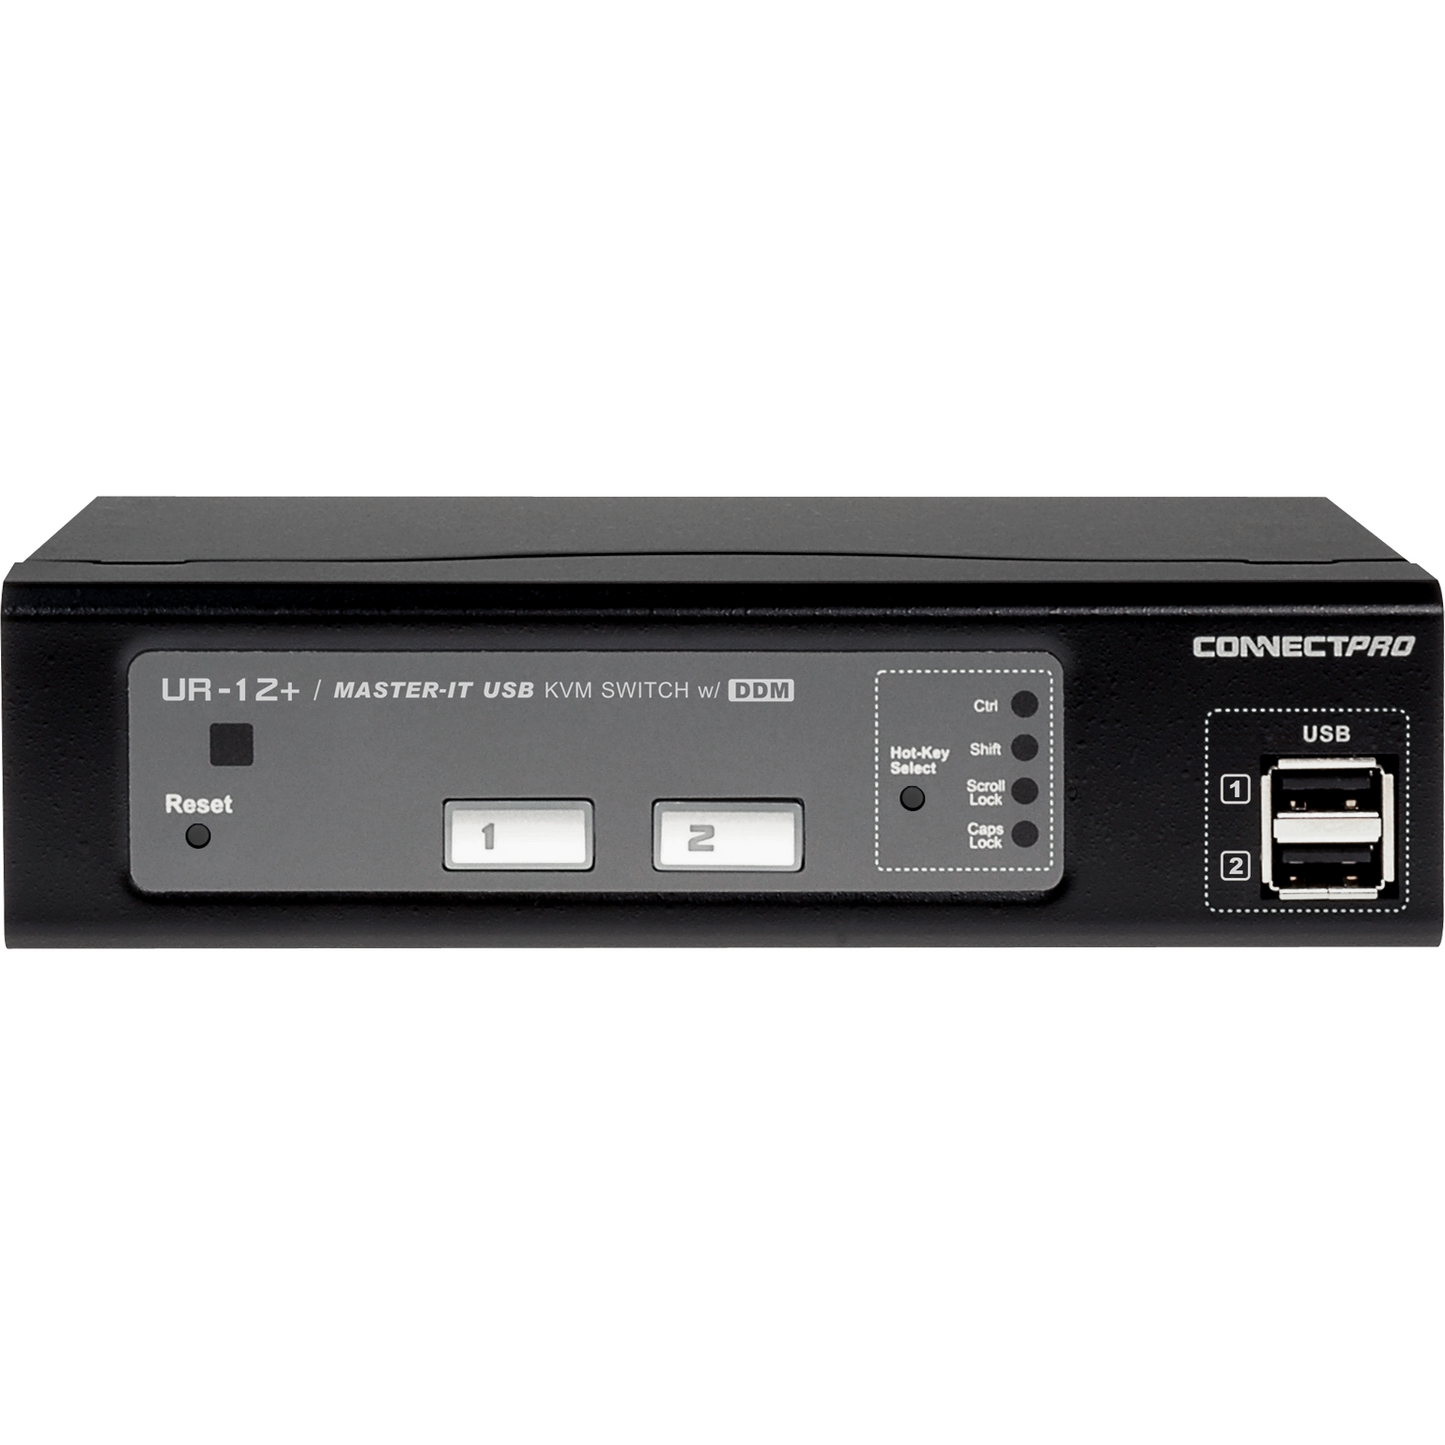 UR-12+ KVM switch for One Monitor and Two Computers